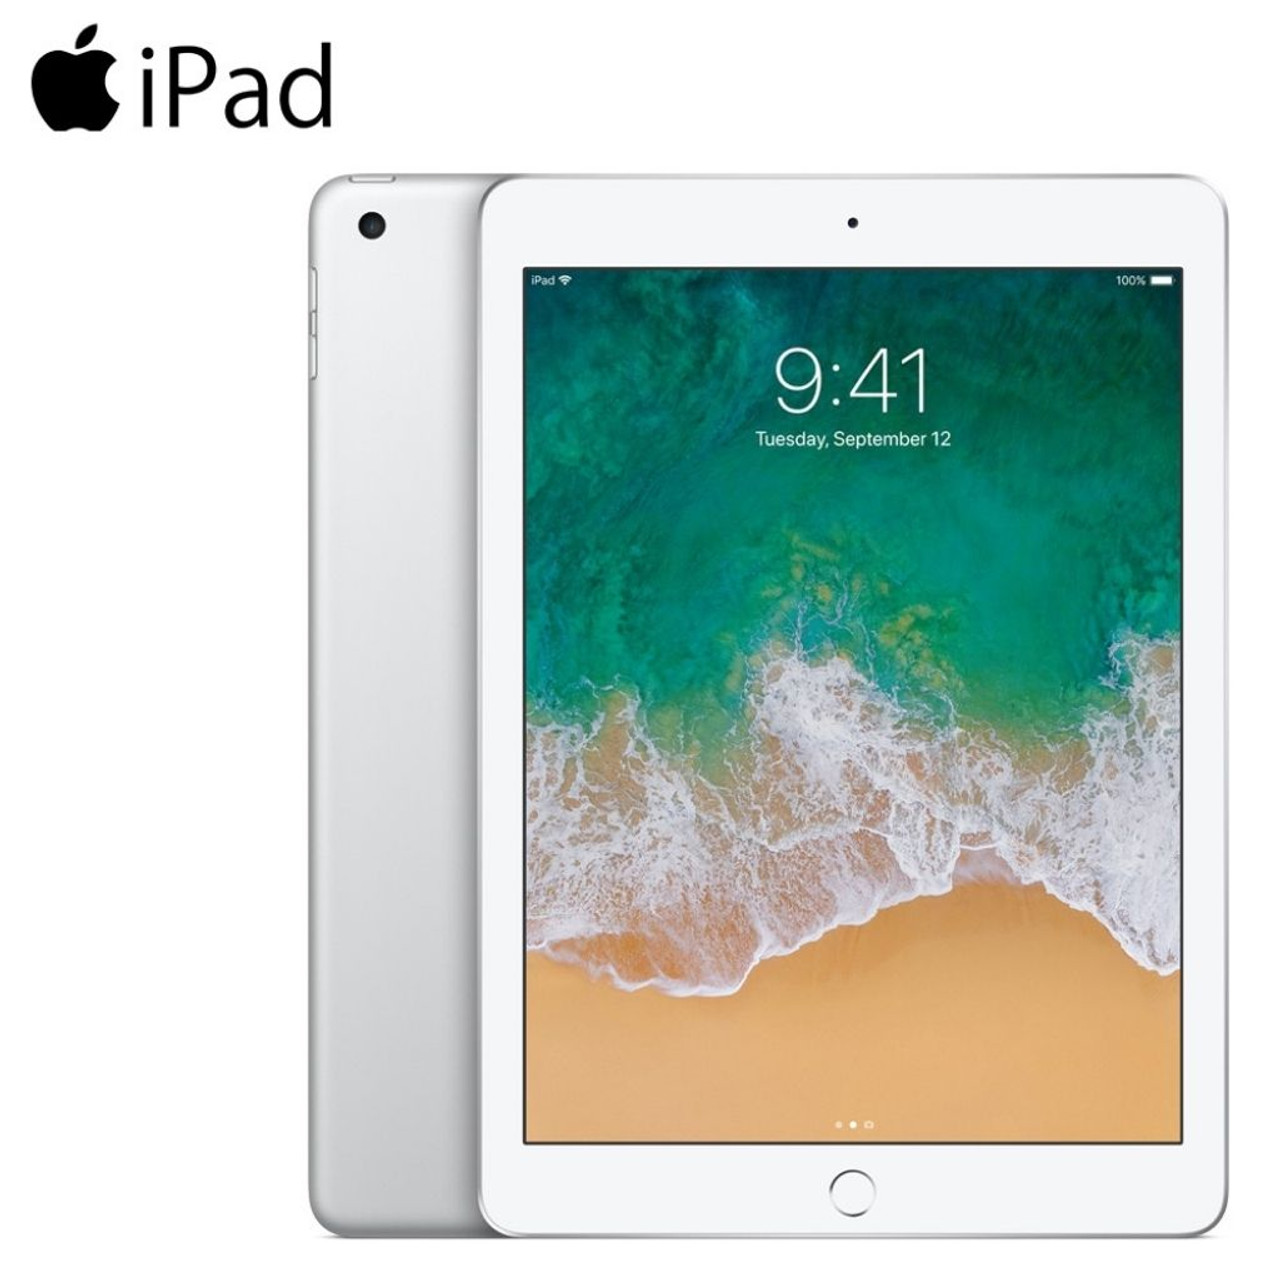 Apple® iPad 5th Generation Retina Display with Touch ID (32GB Silver) $189.99 (68% OFF)